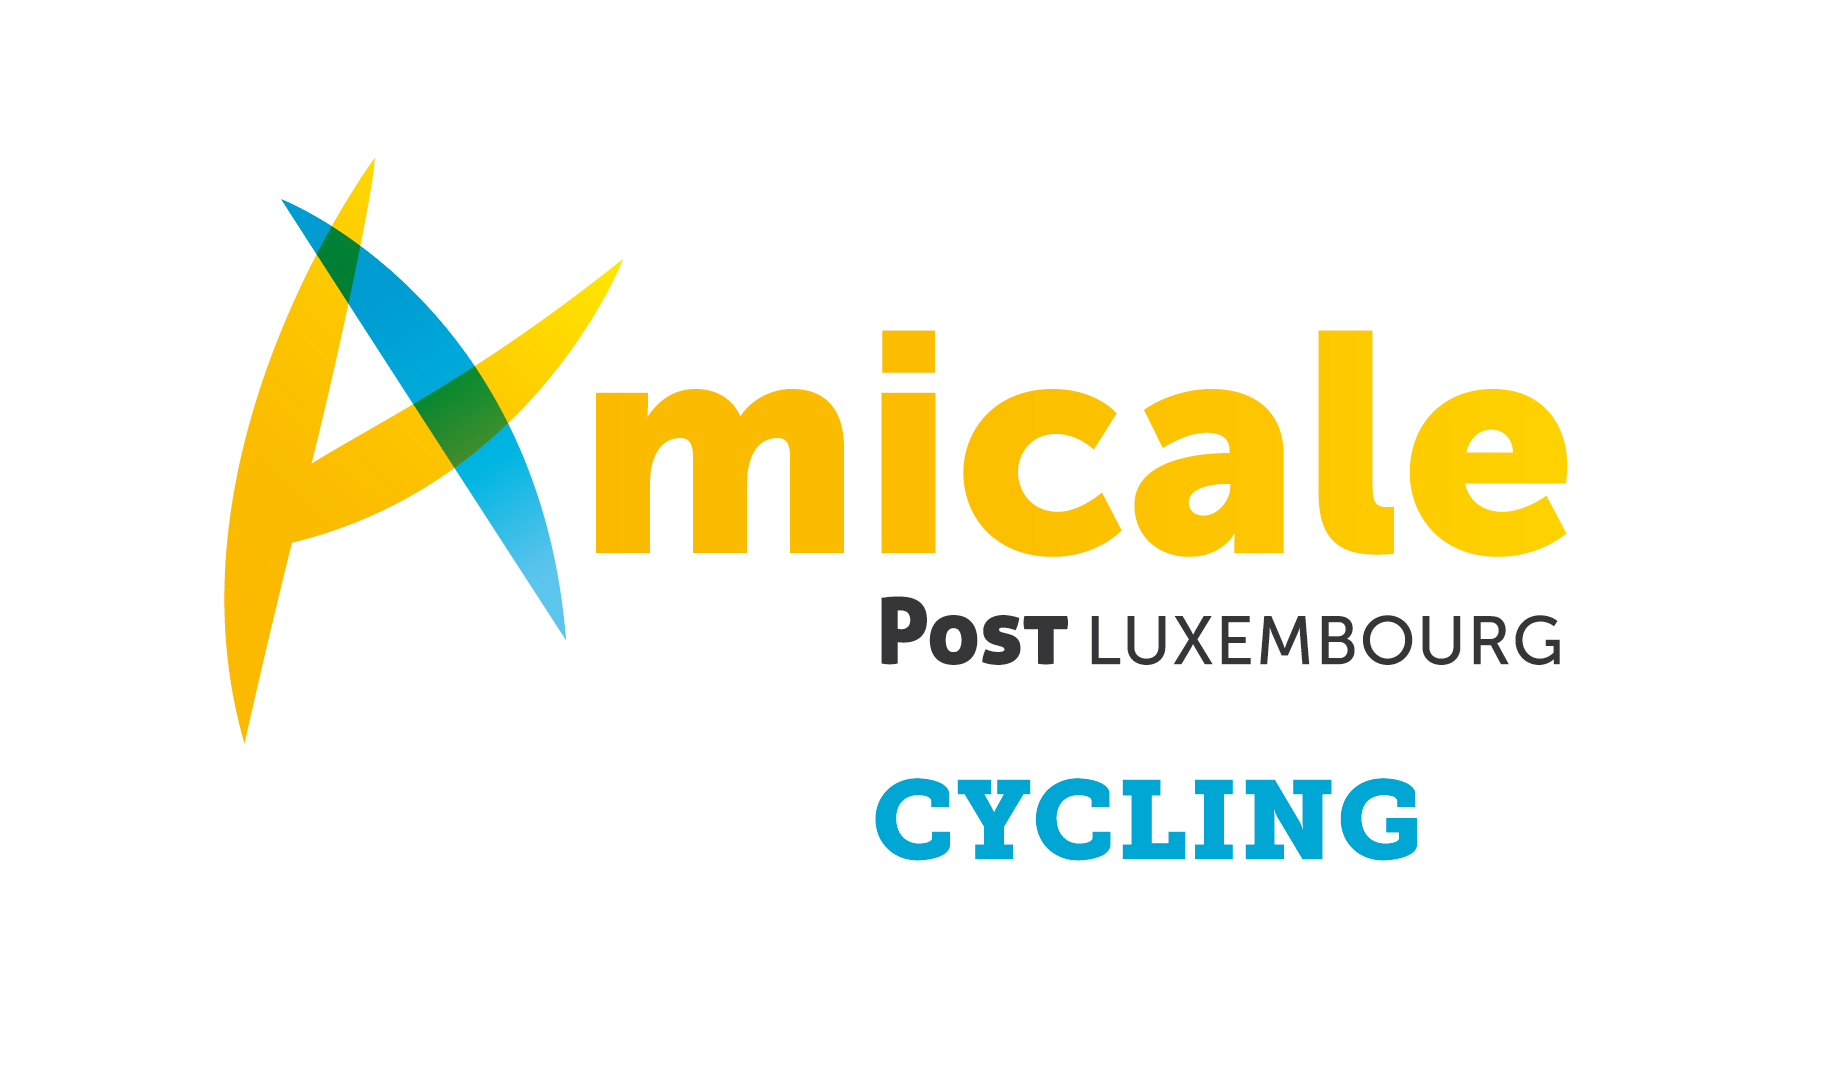 Amicale POST Luxembourg Cycling